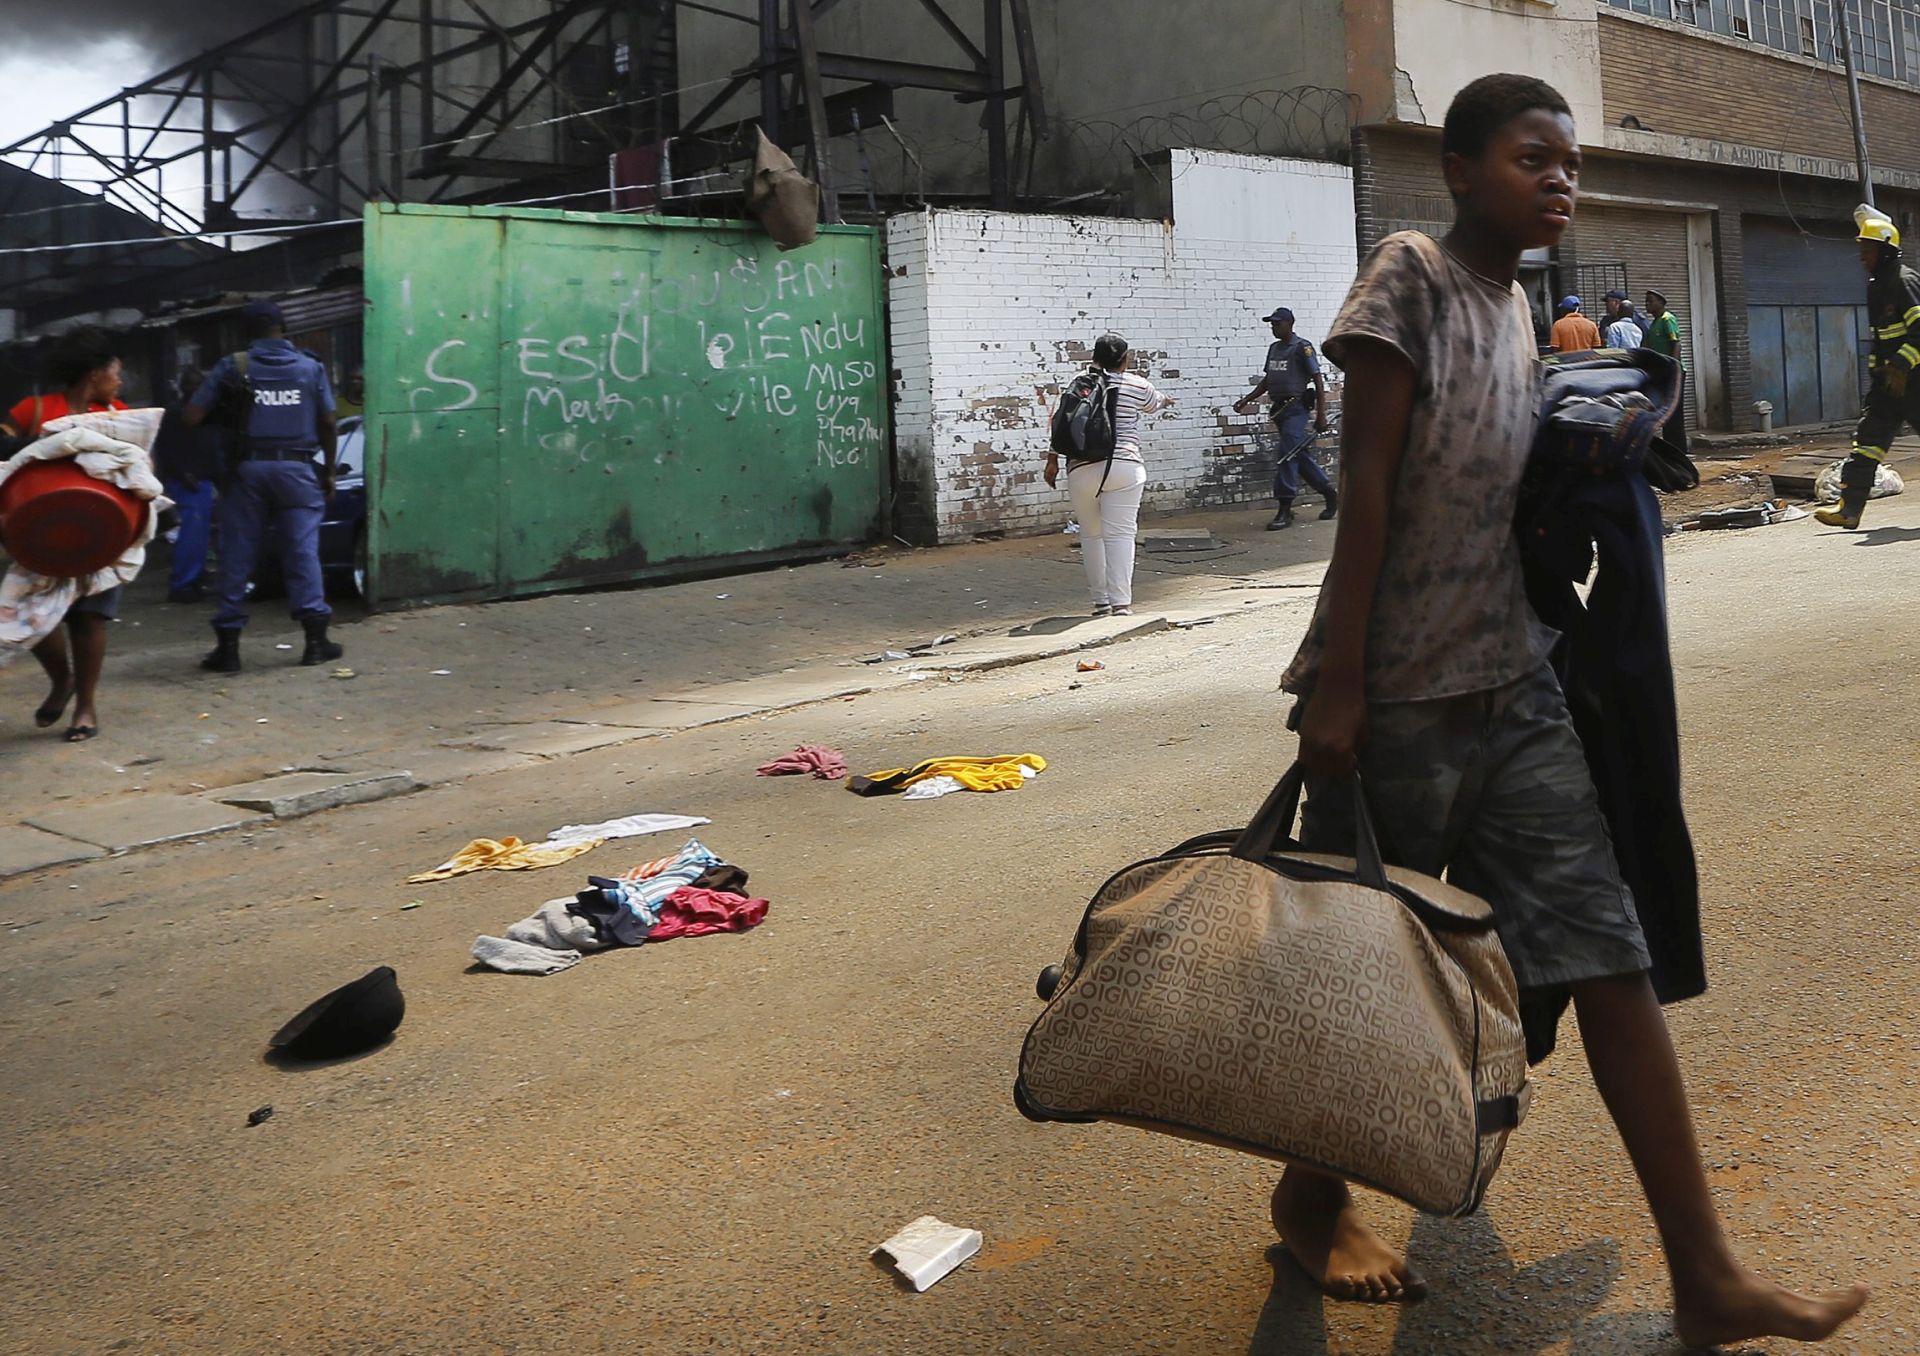 epa04996675 (01/22) A young boy carries all he can as he and other illegal residents of a hijacked building are evicted by South African police forces and a private security company in downtown Johannesburg, South Africa, 29 September 2015. It is unknown where he slept that night. The building, a warehouse, was set alight by some of the illegal residents that had been evicted. Hundreds of people had made the 'dark building' home after it was occupied years previously. It is unclear who the original owner is. Hundreds of people evicted had no other accommodation to go to and ended up sleeping on the streets as homeless.  EPA/KIM LUDBROOK PLEASE REFER TO THIS ADVISORY NOTICE (epa04996673) FOR FULL PACKAGE TEXT